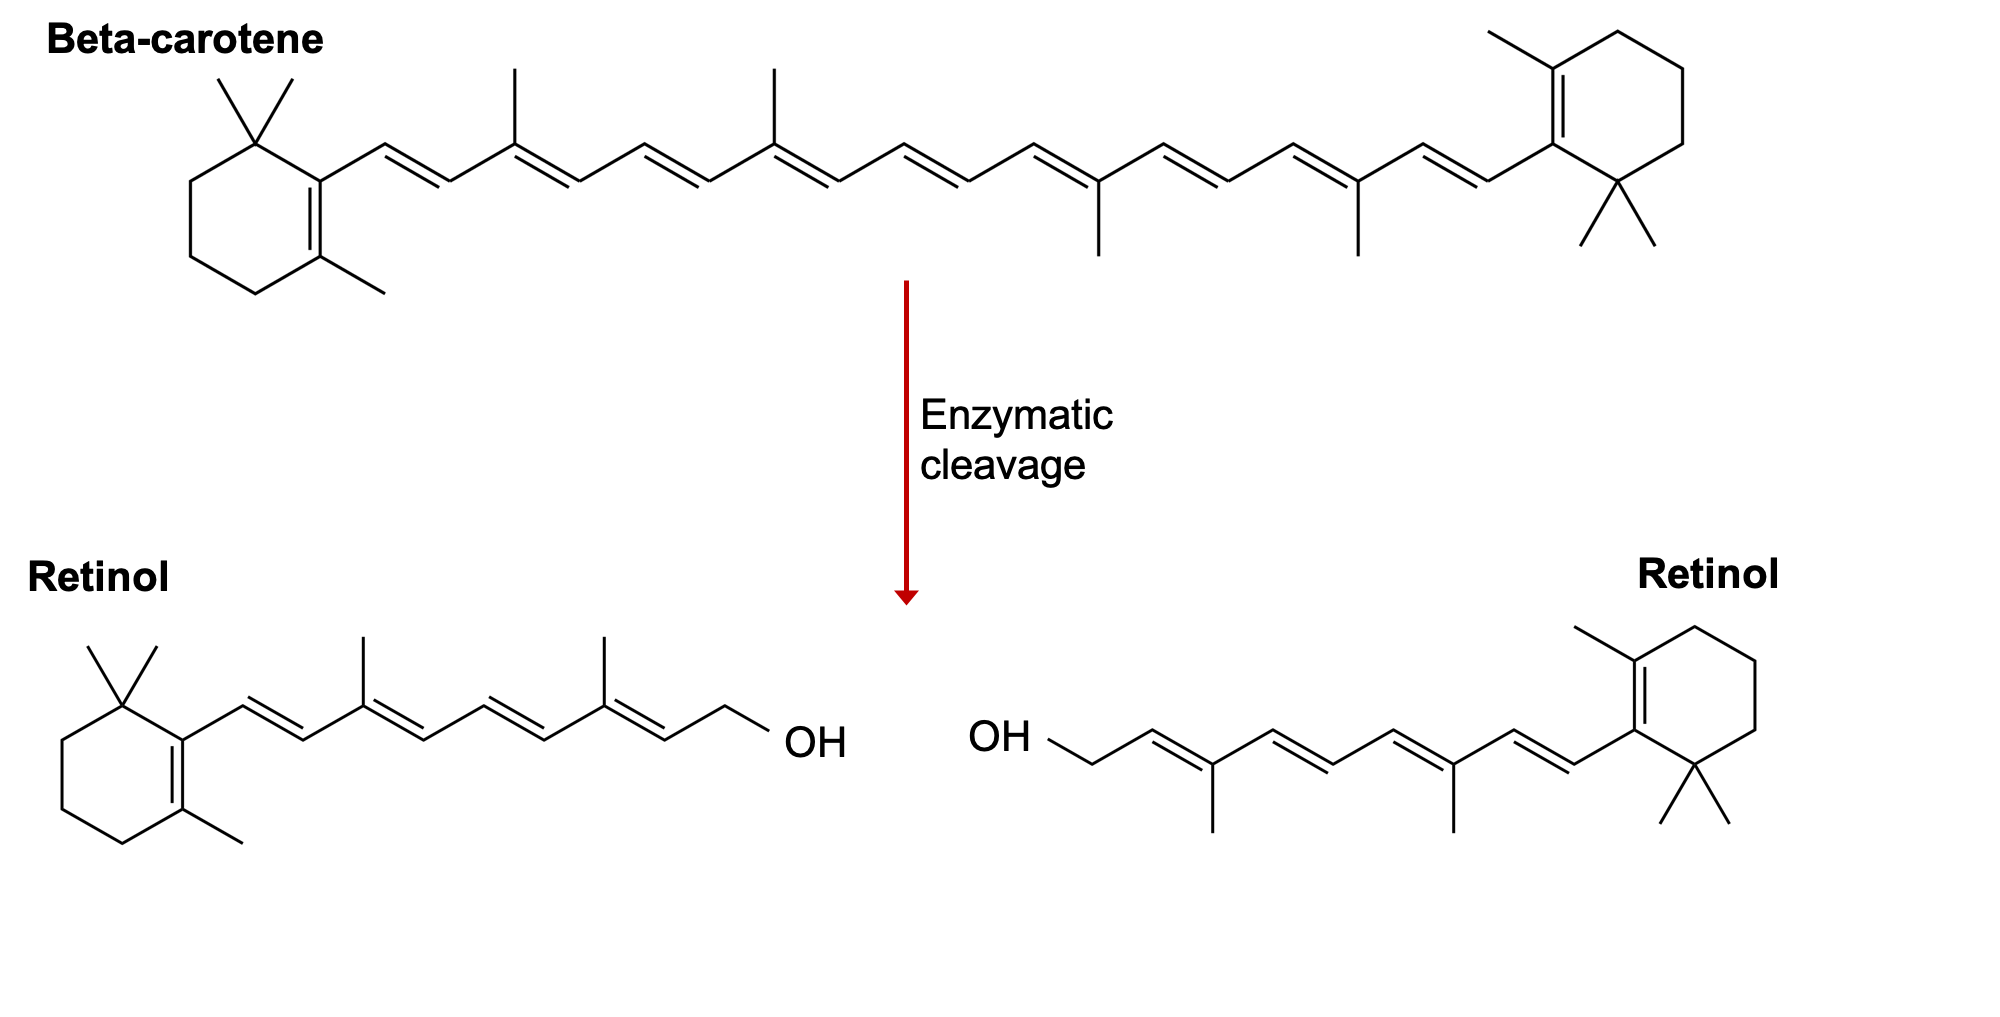 The image shows the skeletal formula of beta-carotene and how two molecules of retinol are formed when it is cleaved in half by an enzyme.